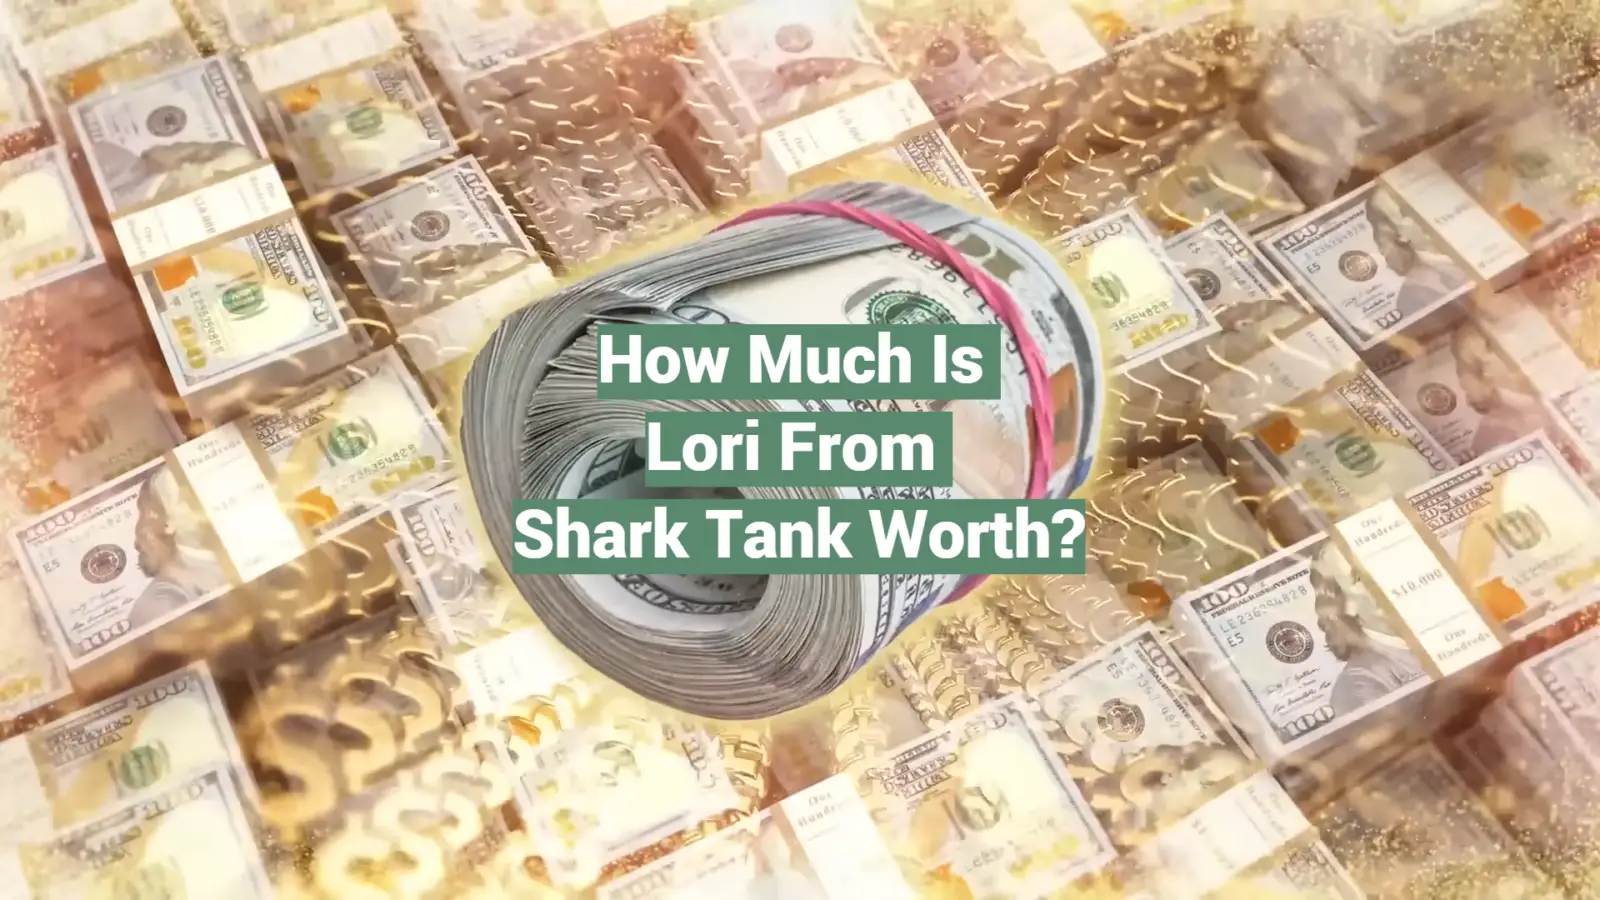 How Much Is Lori From Shark Tank Worth?